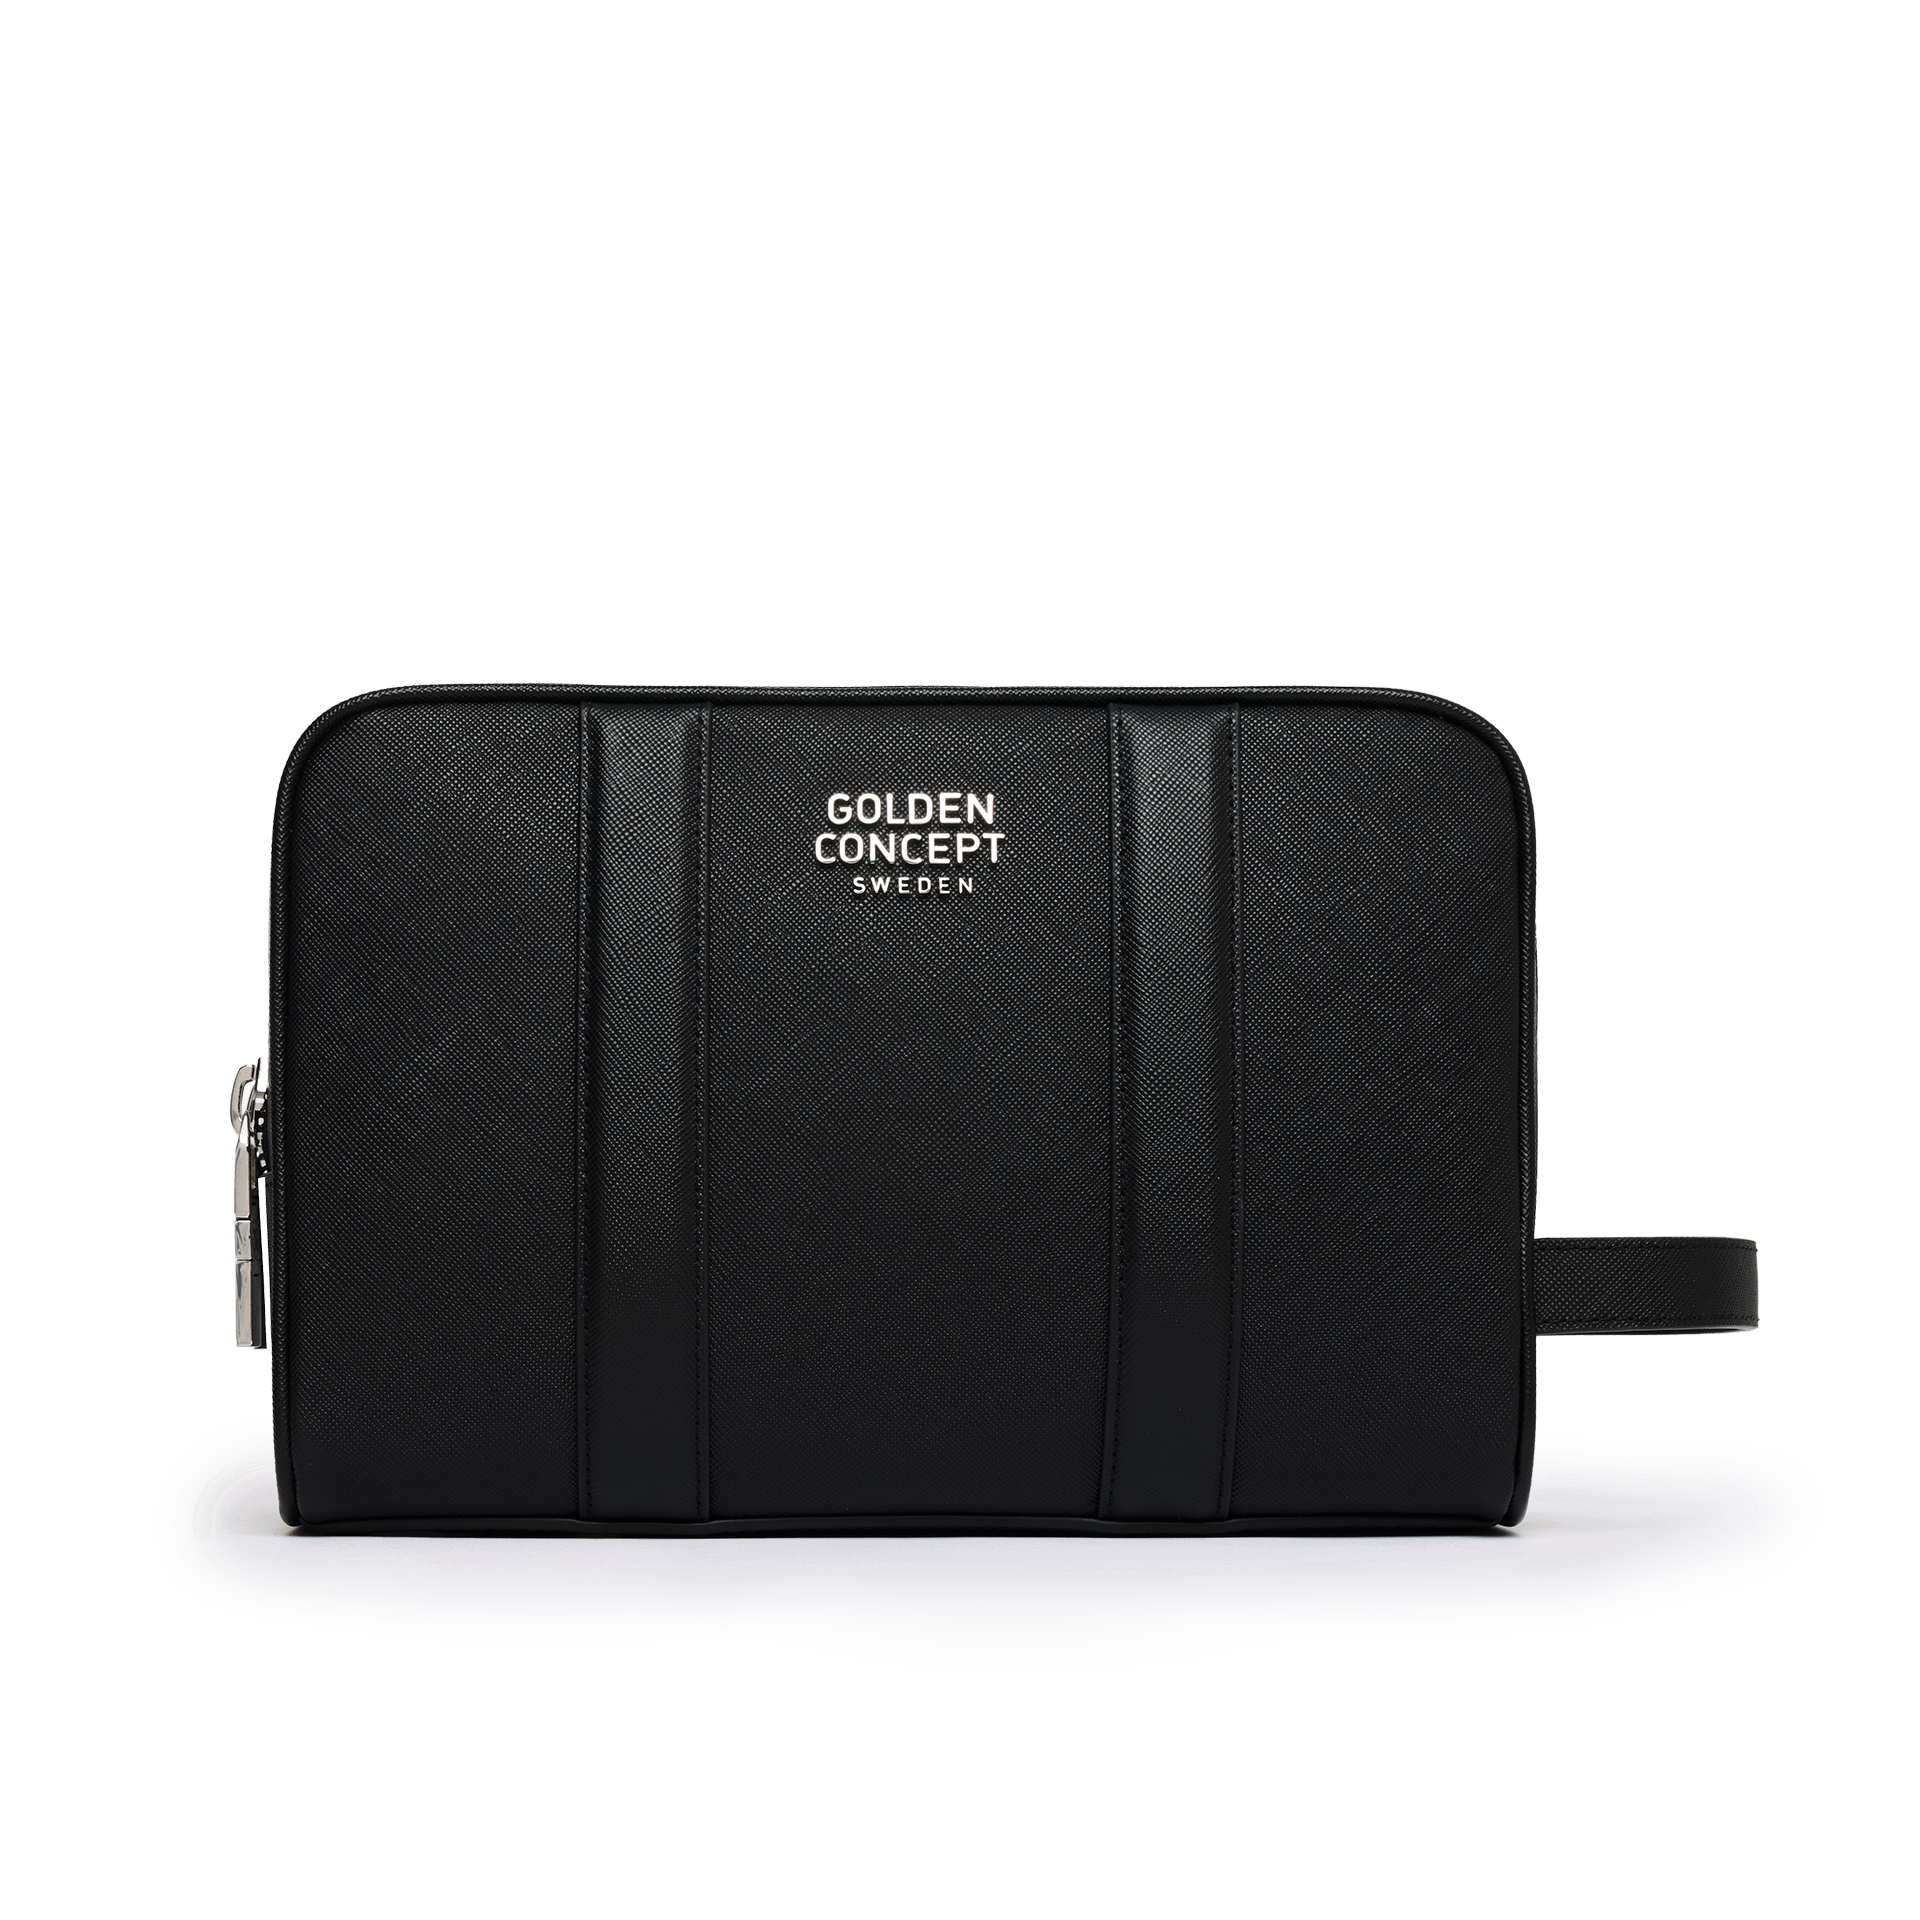 Golden Concept - Leather Accessories - Toiletry Bag - Saffiano Leather - Large